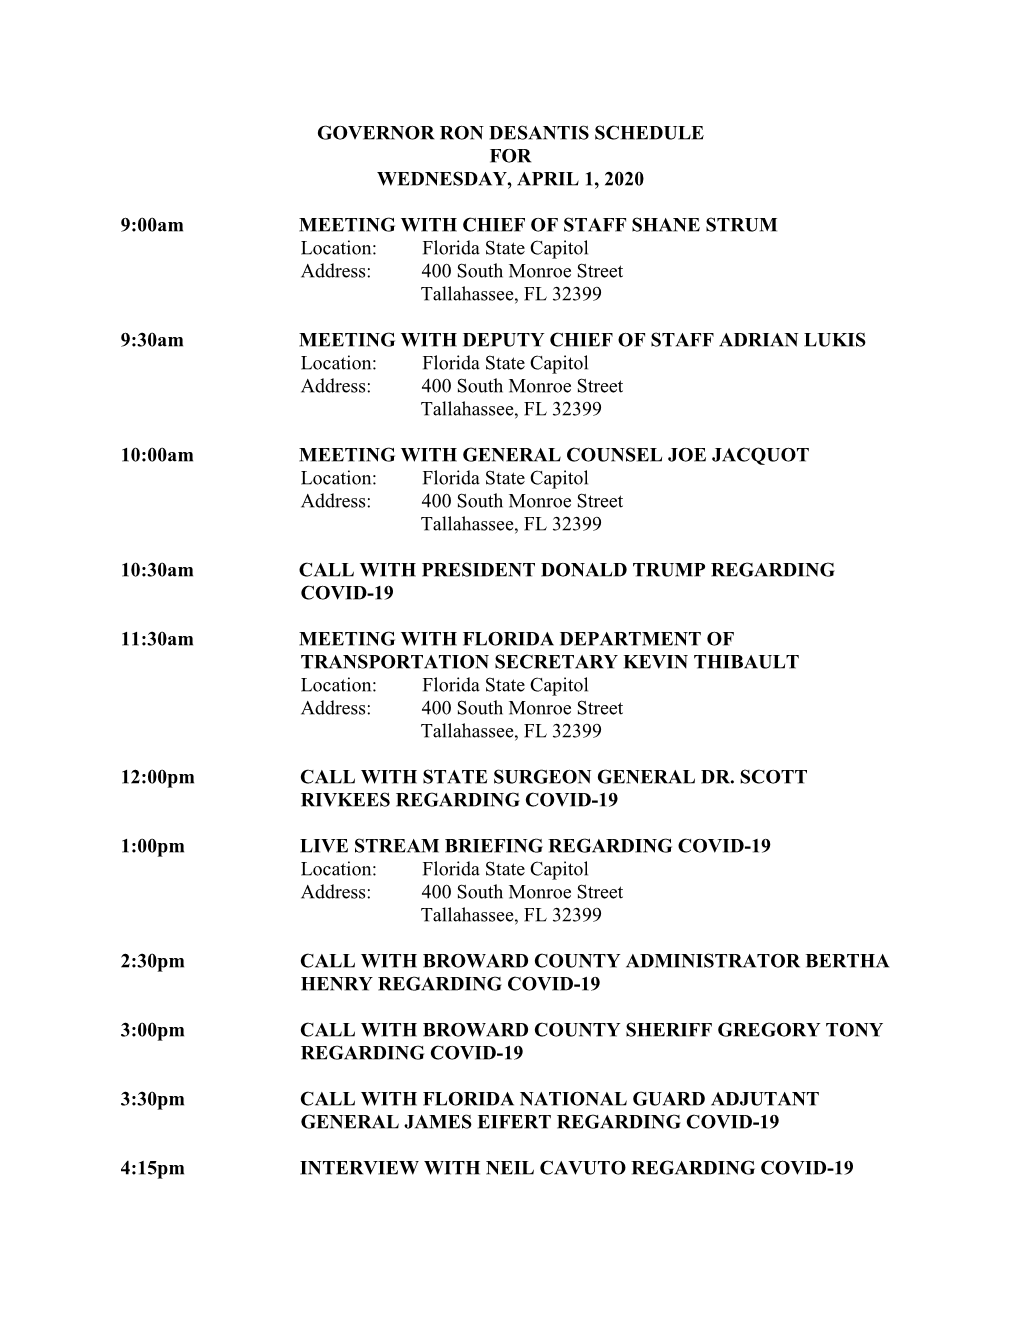 Governor Ron Desantis Schedule for Wednesday, April 1, 2020